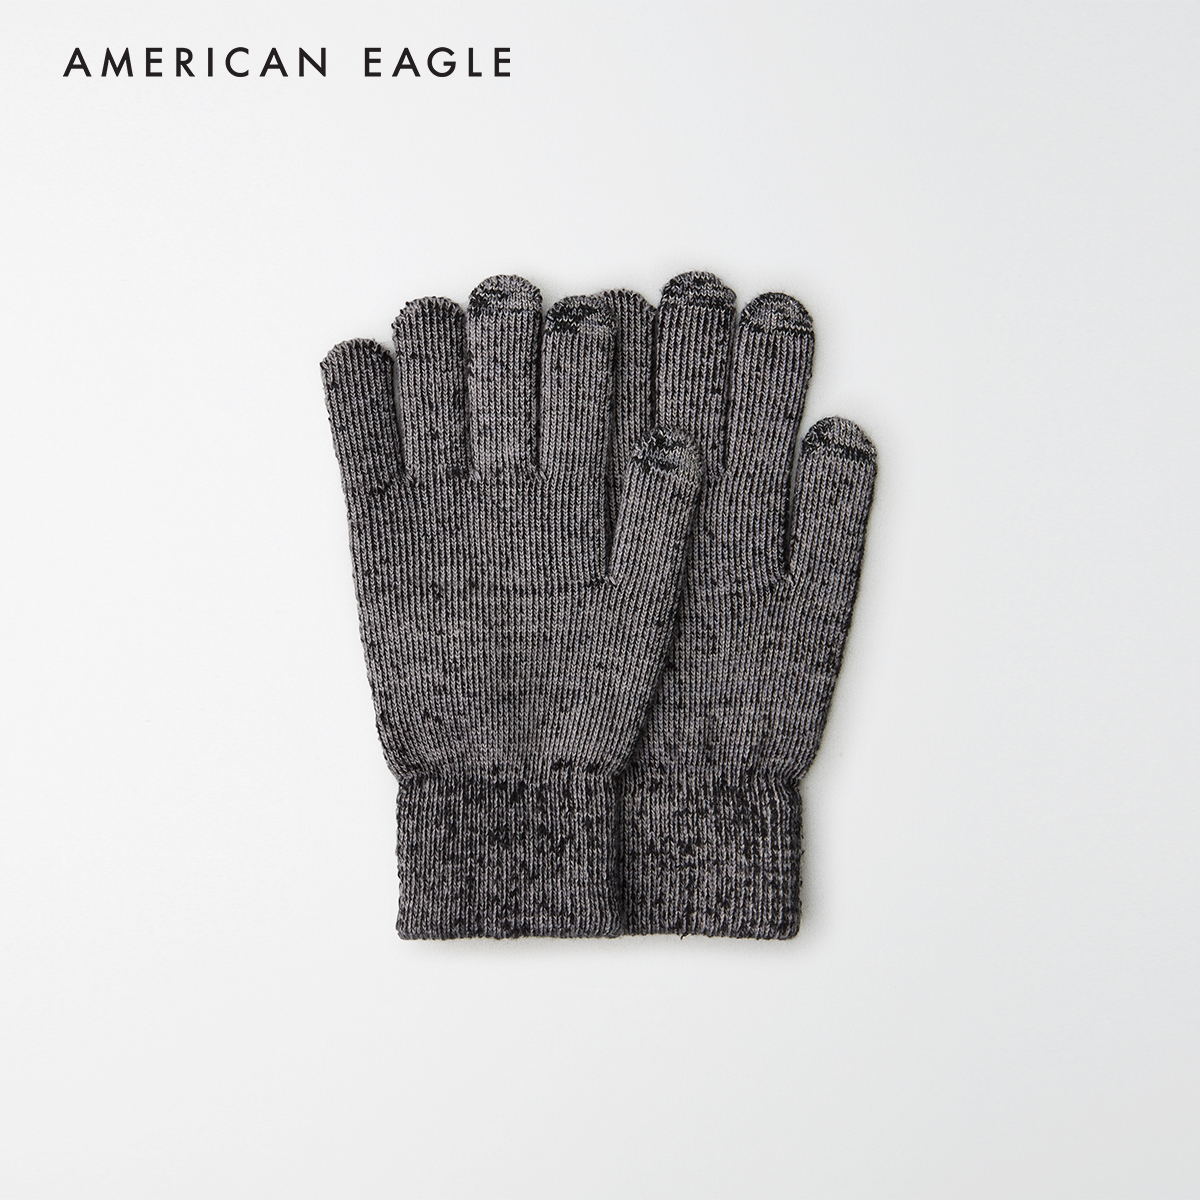 American Eagle Touch Screen Gloves ถุงมือ ผู้ชาย ทัชสกรีน(022-6281-033)